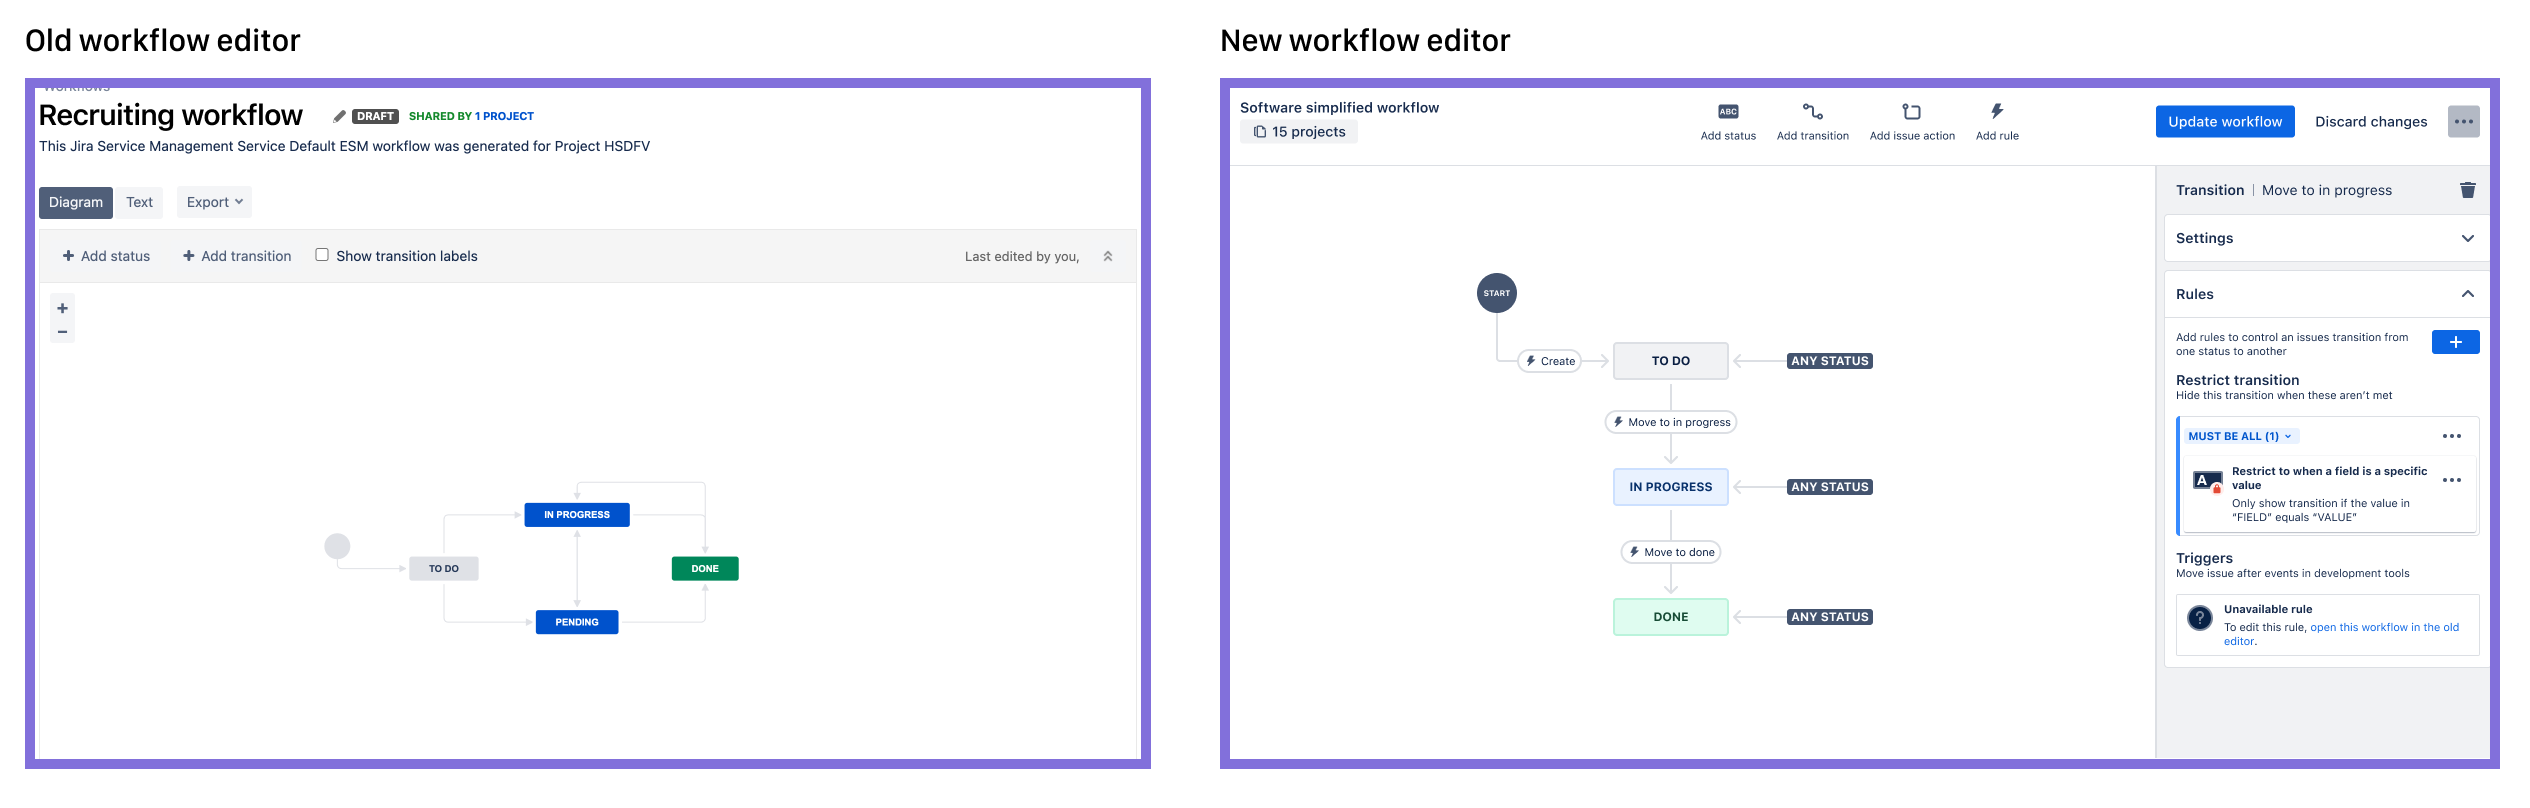 Screenshots of of the old and new workflow editors side-by-side